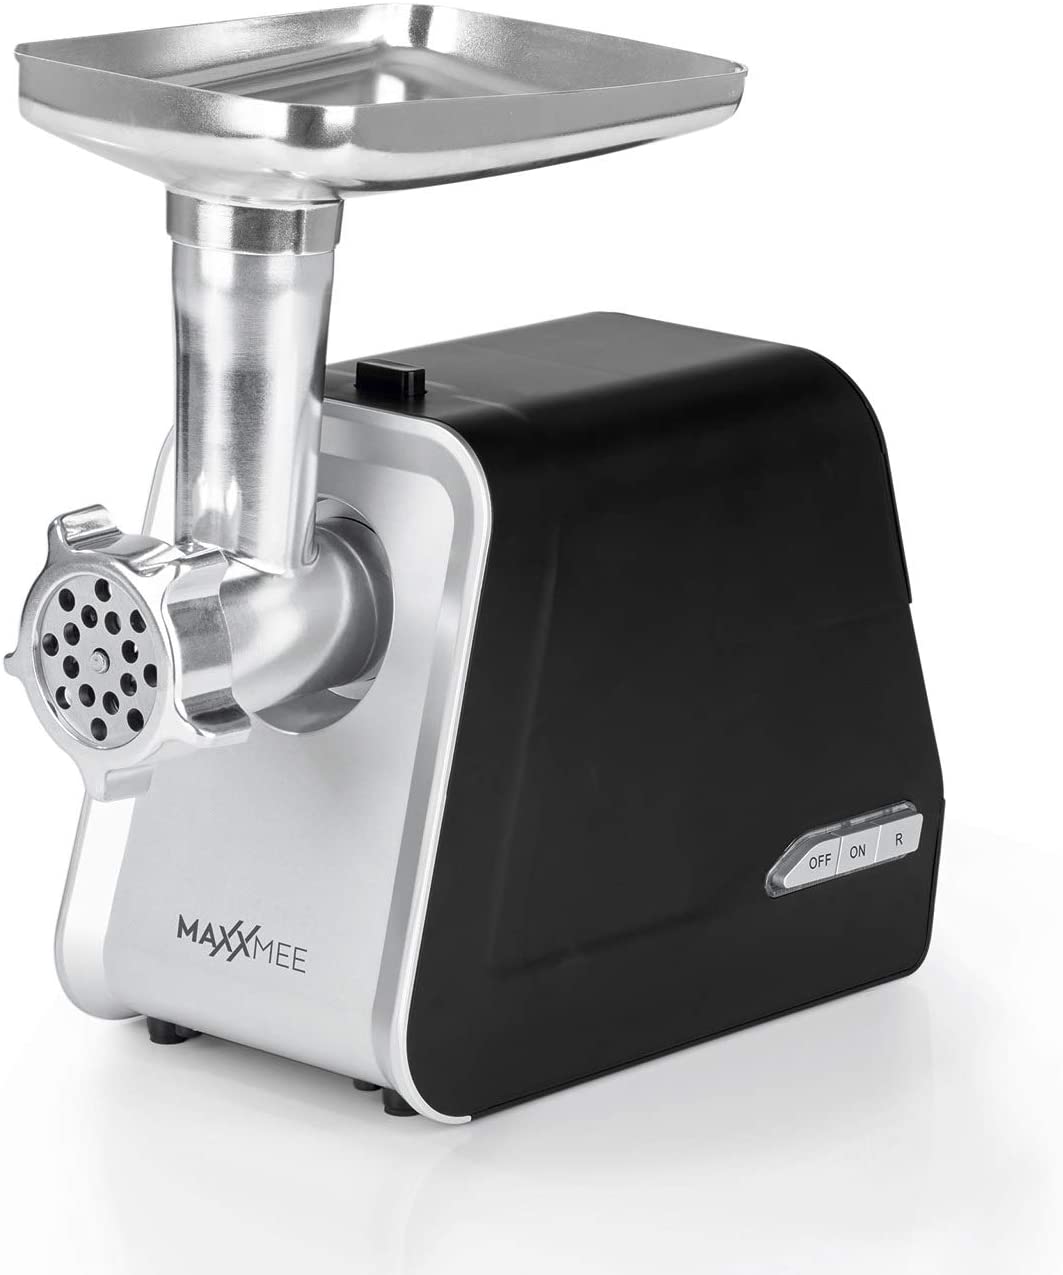 MAXXMEE Meat Mincer - 1600 W - Forward and Reverse Run | Powerful with Extensive Accessories | For Meat, Kebbe, Pastries and Much More | Non-Slip Feet for Secure Stand [Silver/Black]